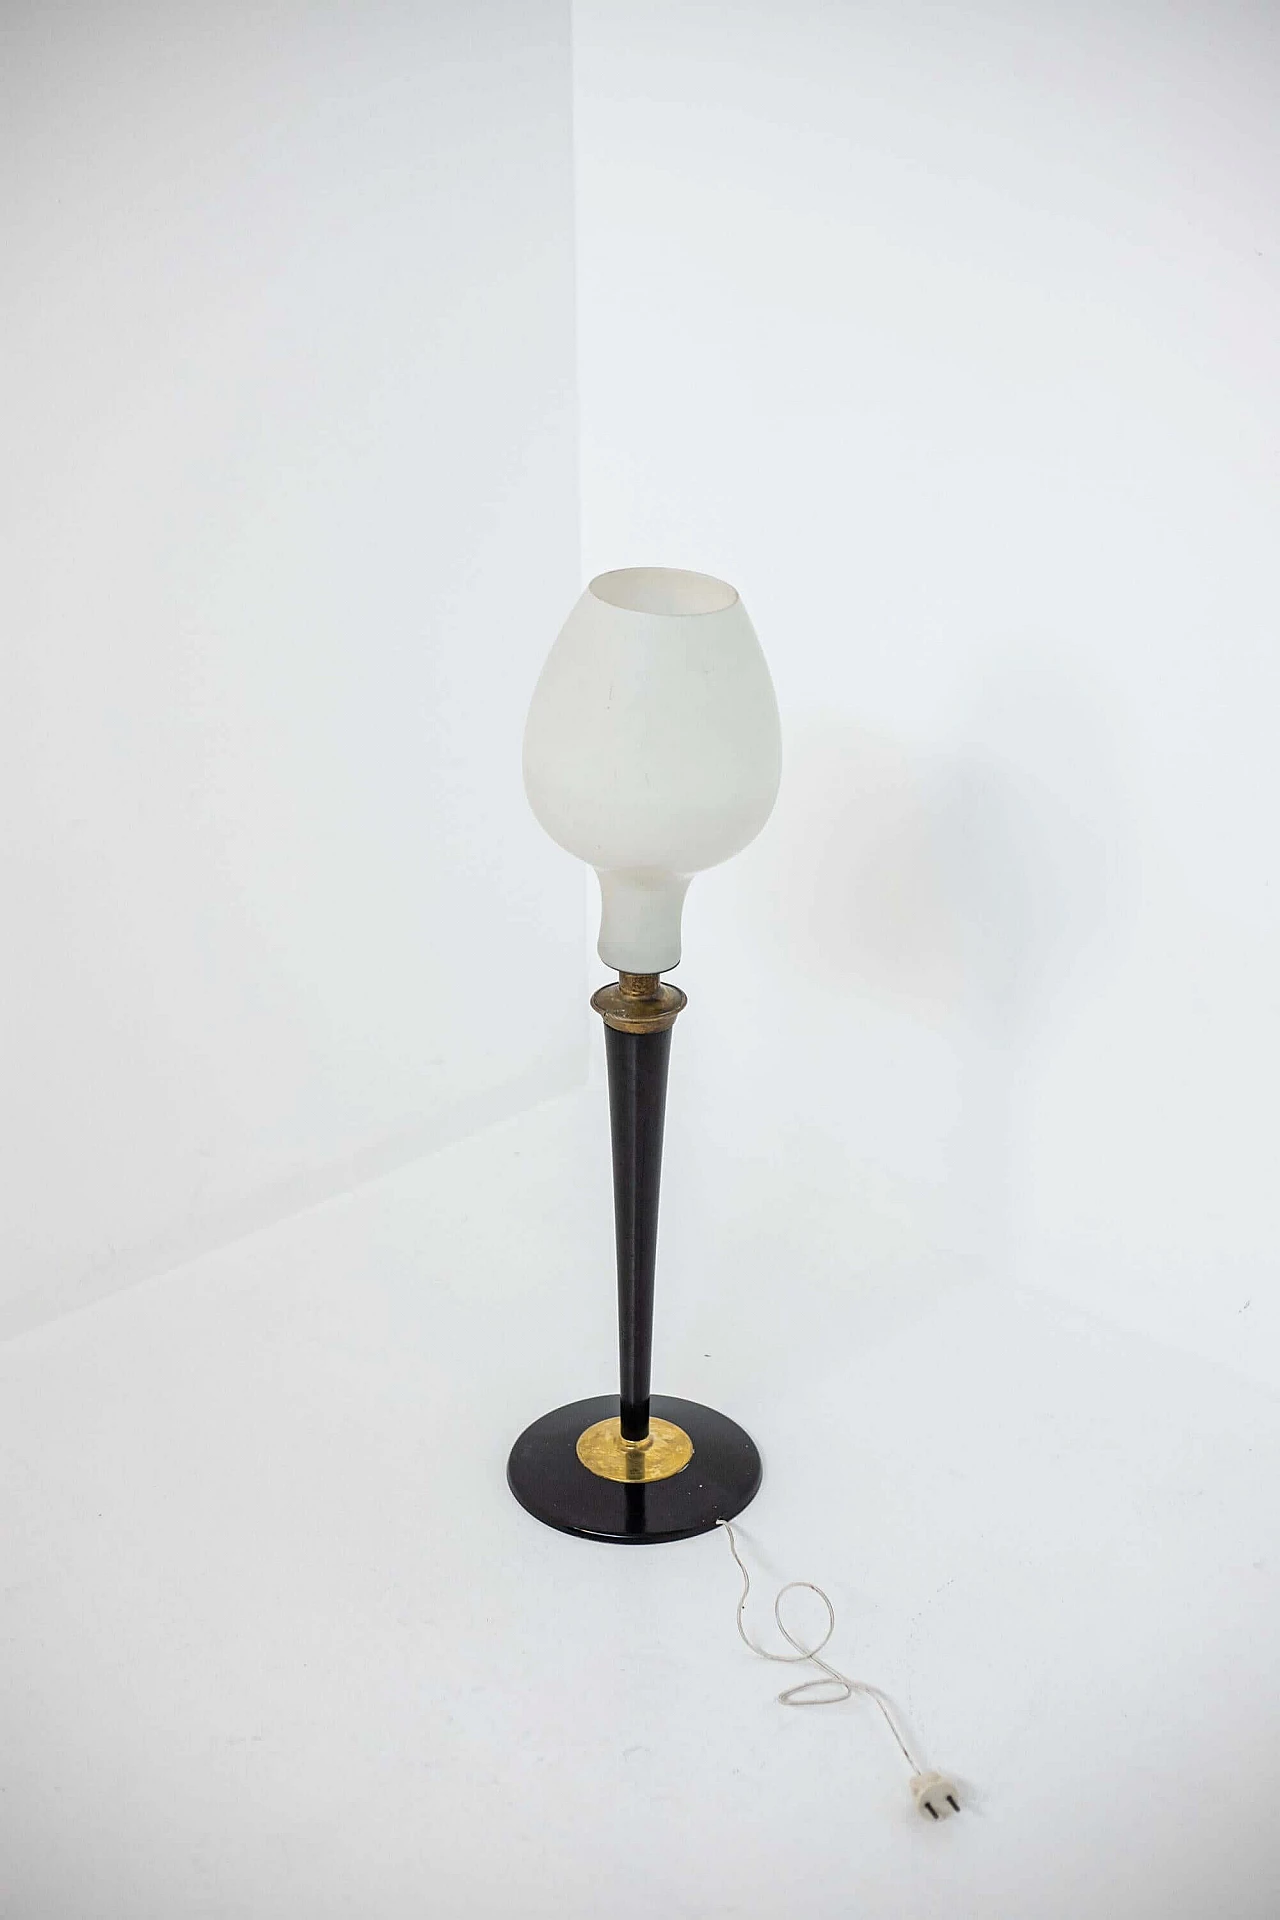 Opal glass table lamp with wood and brass frame, 1950s 1400579